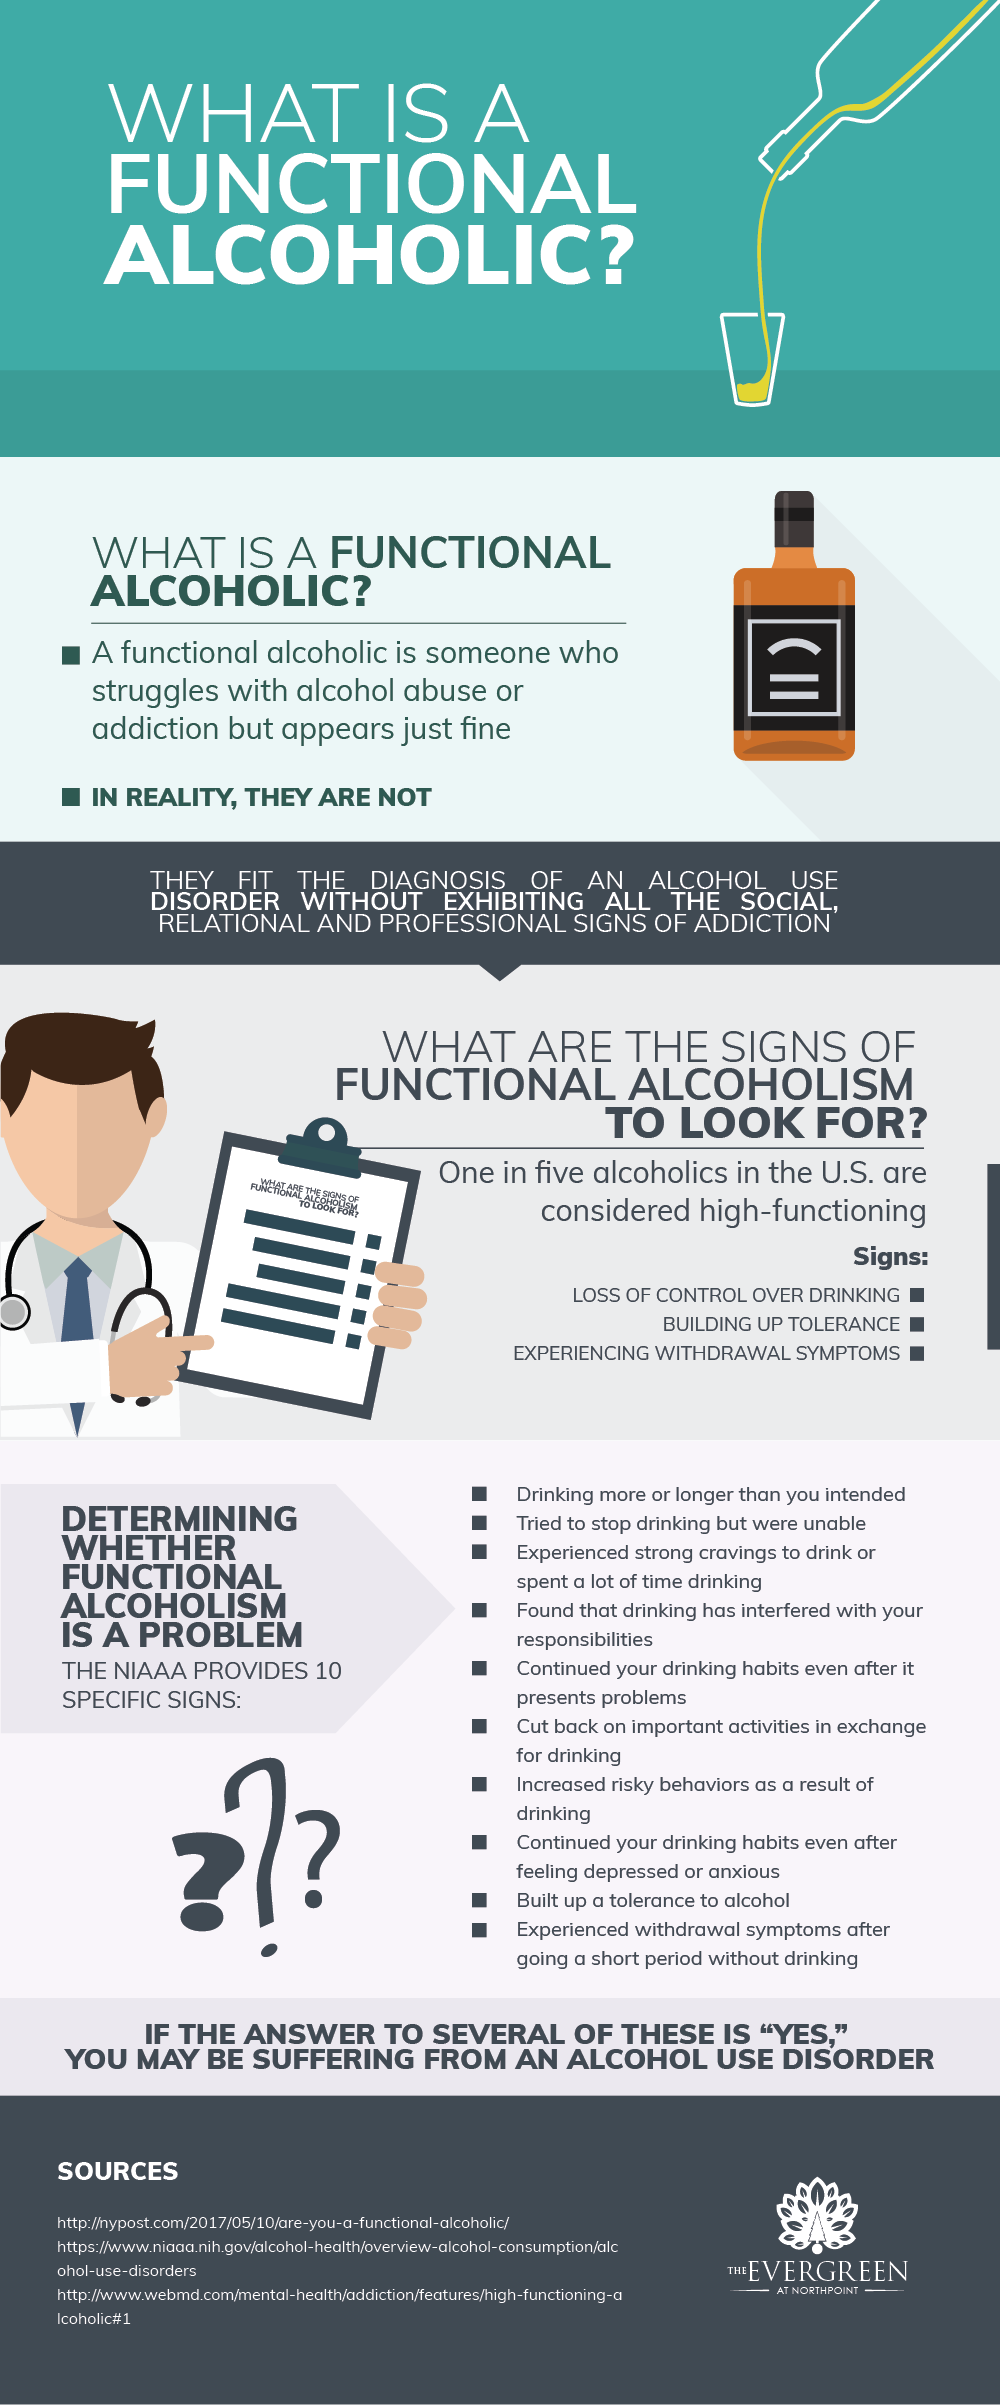 What is a Functional Alcoholic?